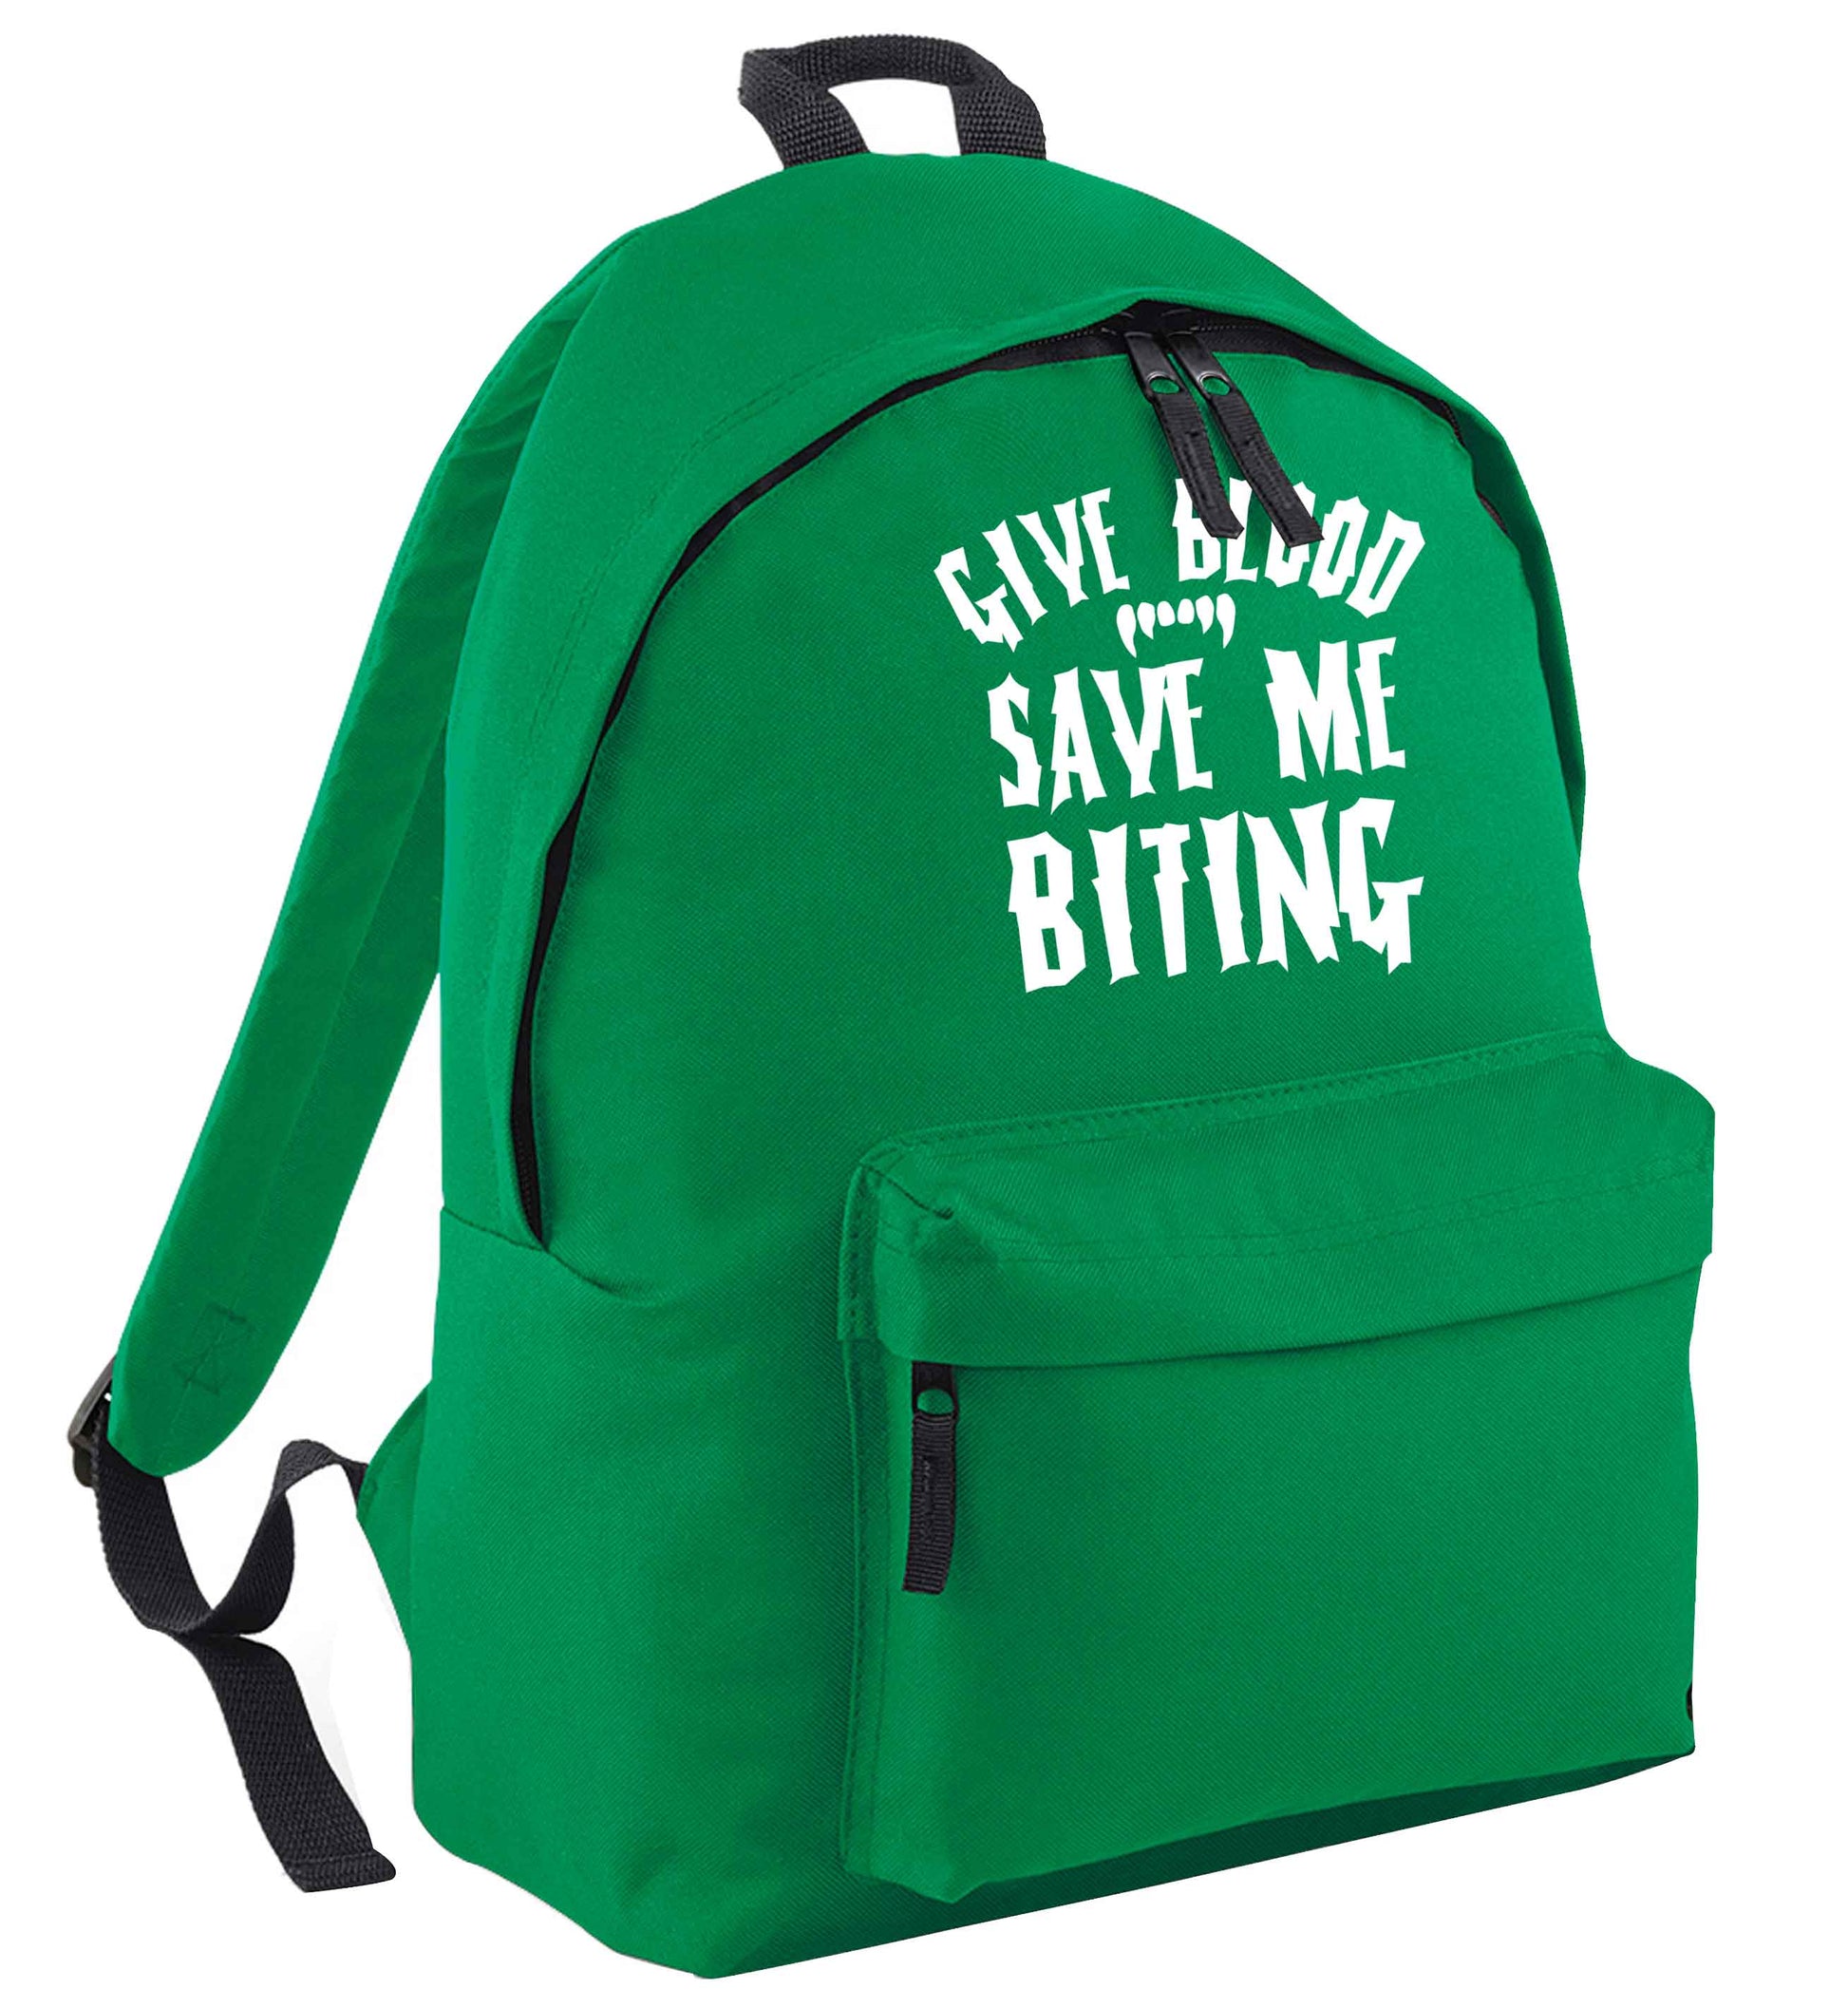 Give blood save me biting green adults backpack